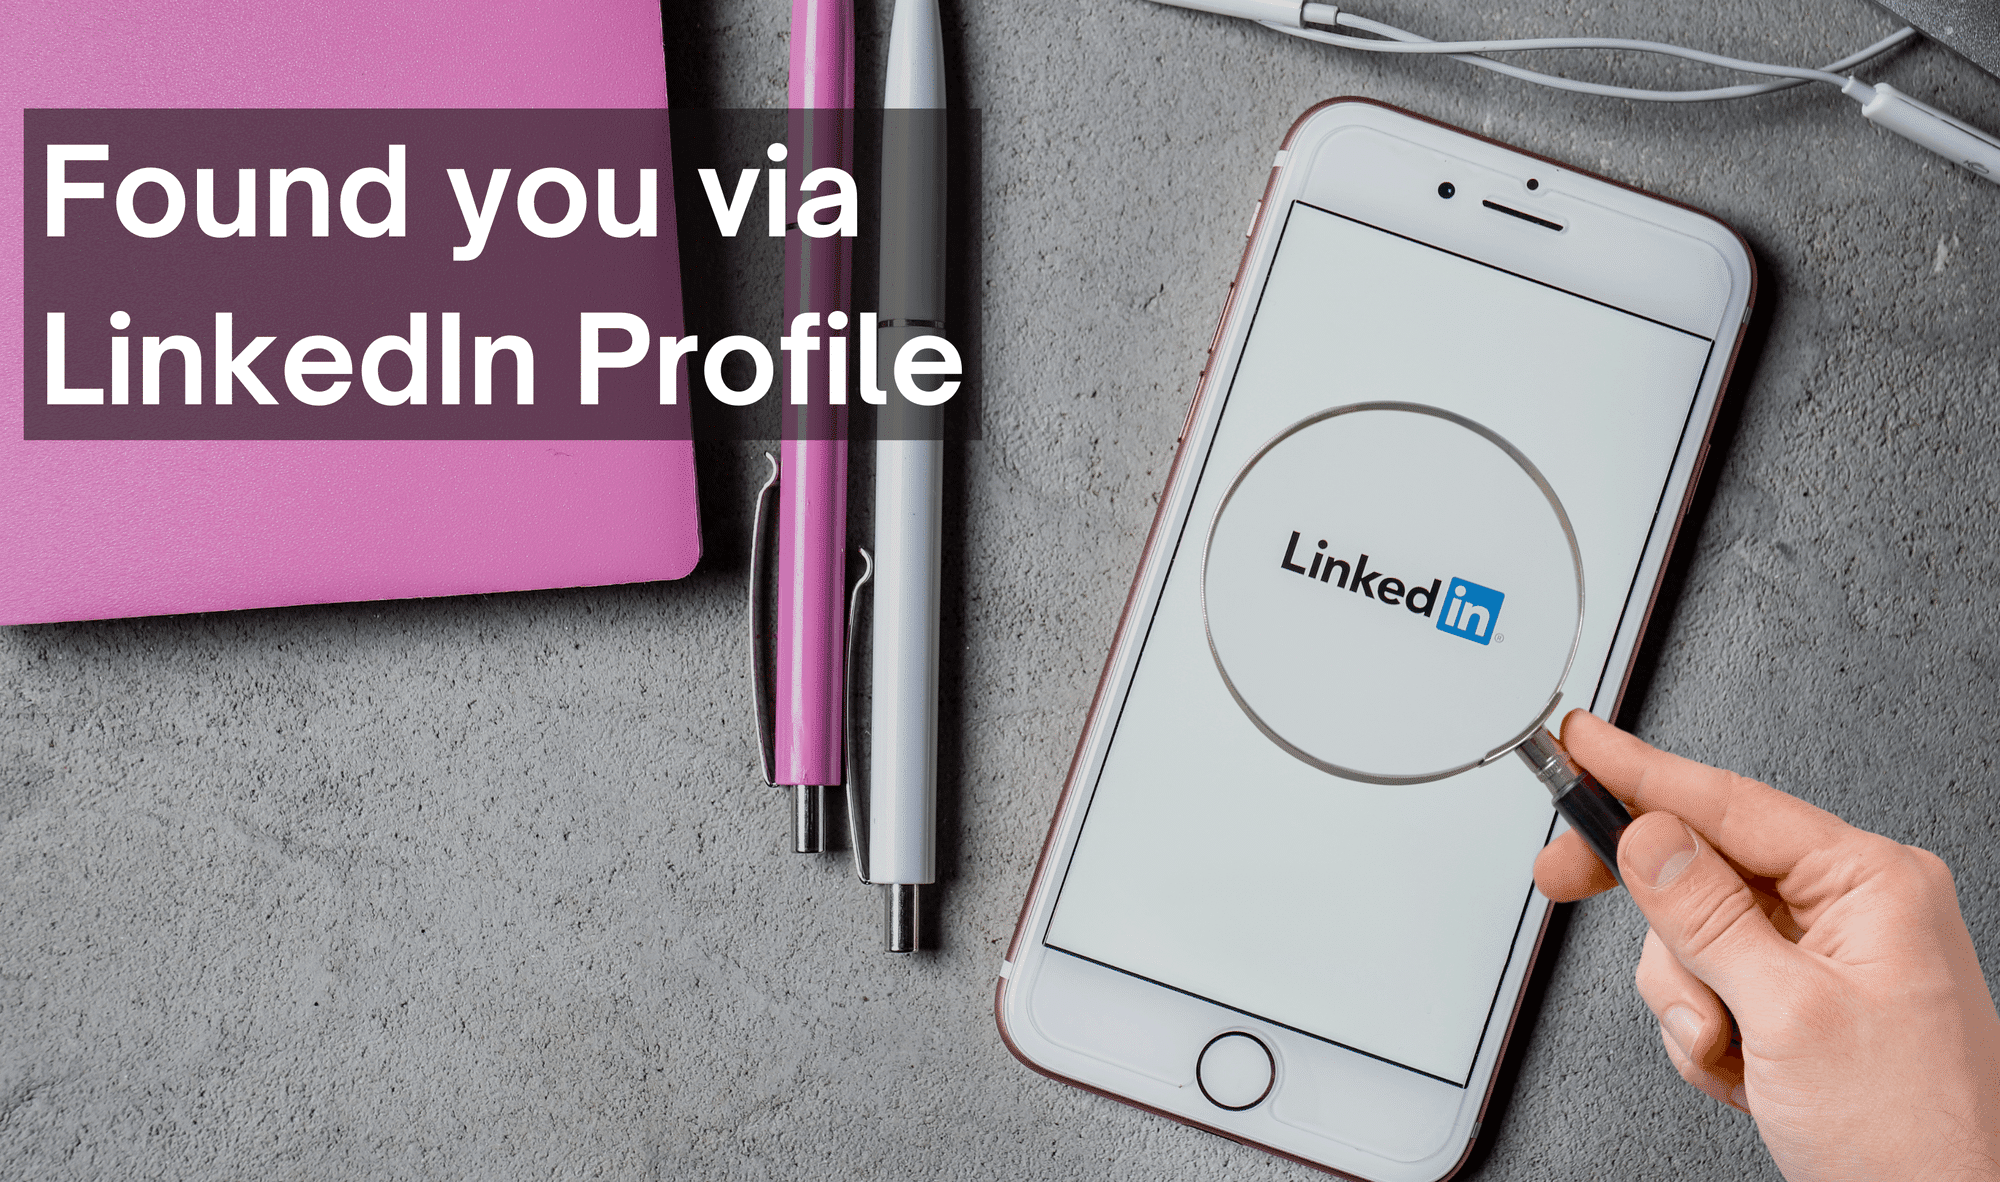 ‘Found You Via LinkedIn Profile’: What Does It Mean?